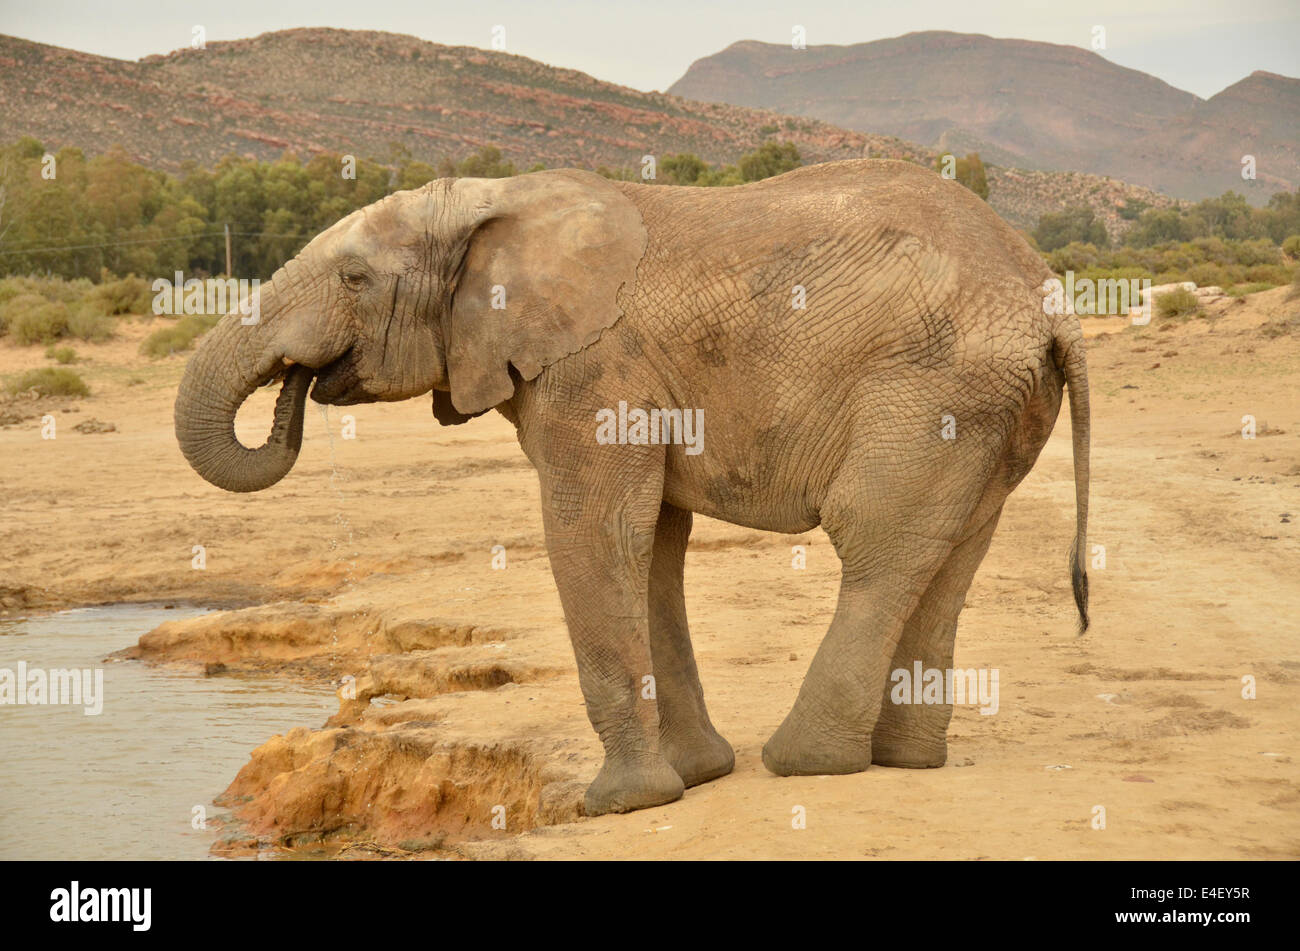 Young African Elephant drinking water at a pool Stock Photo